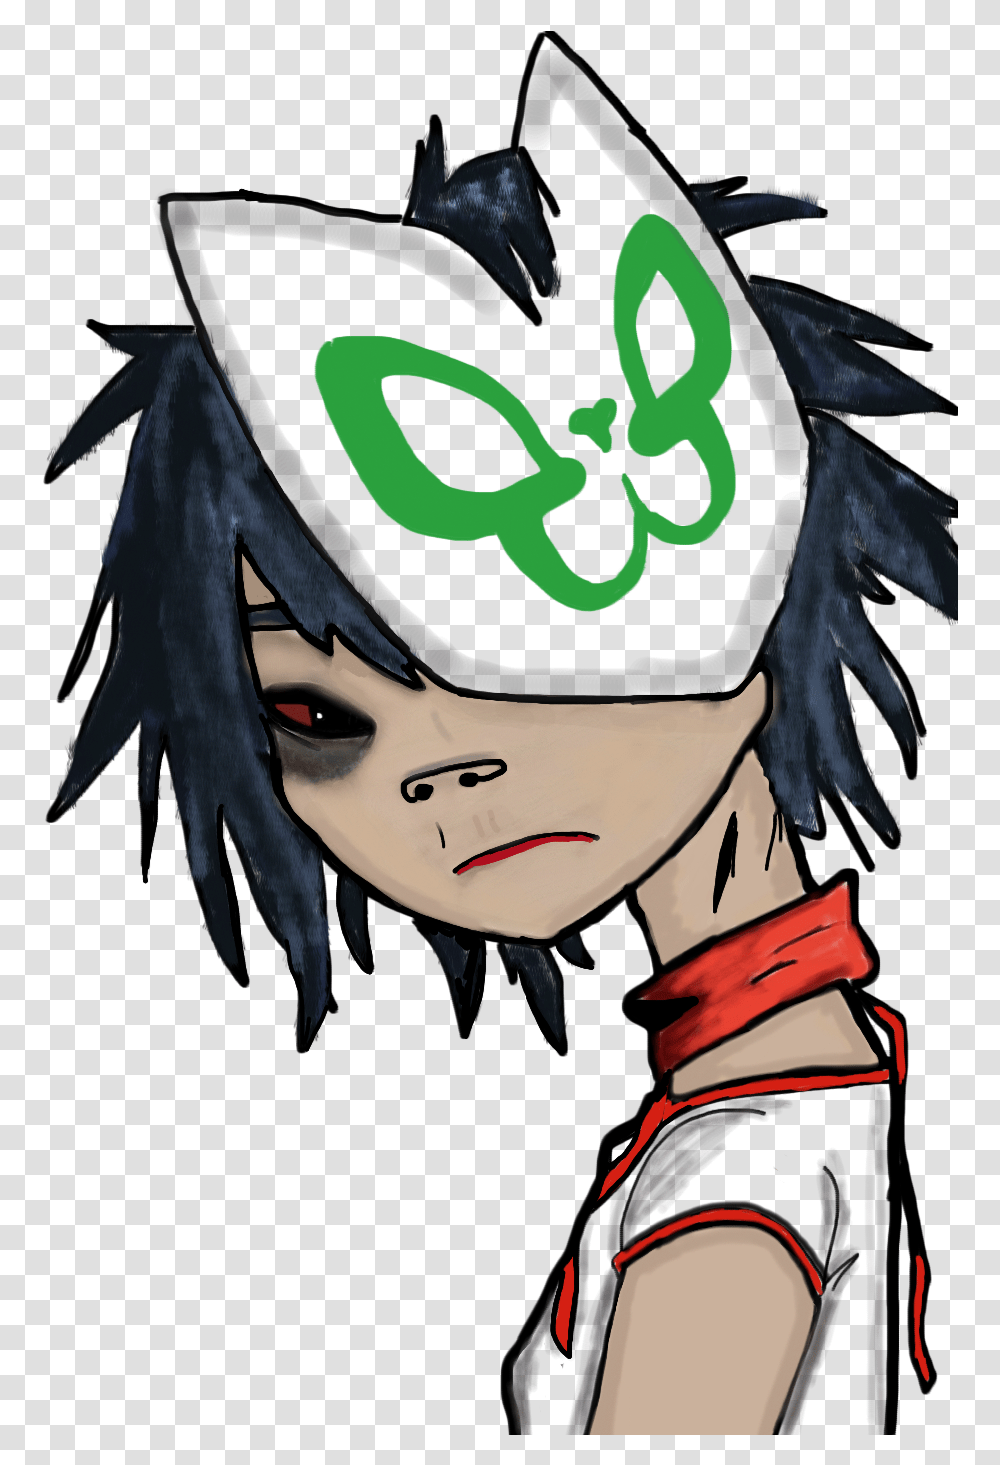 I Did A Noodle Drawing It Took Me Forever Tho Goril Cartoon, Person, Ninja, Manga Transparent Png